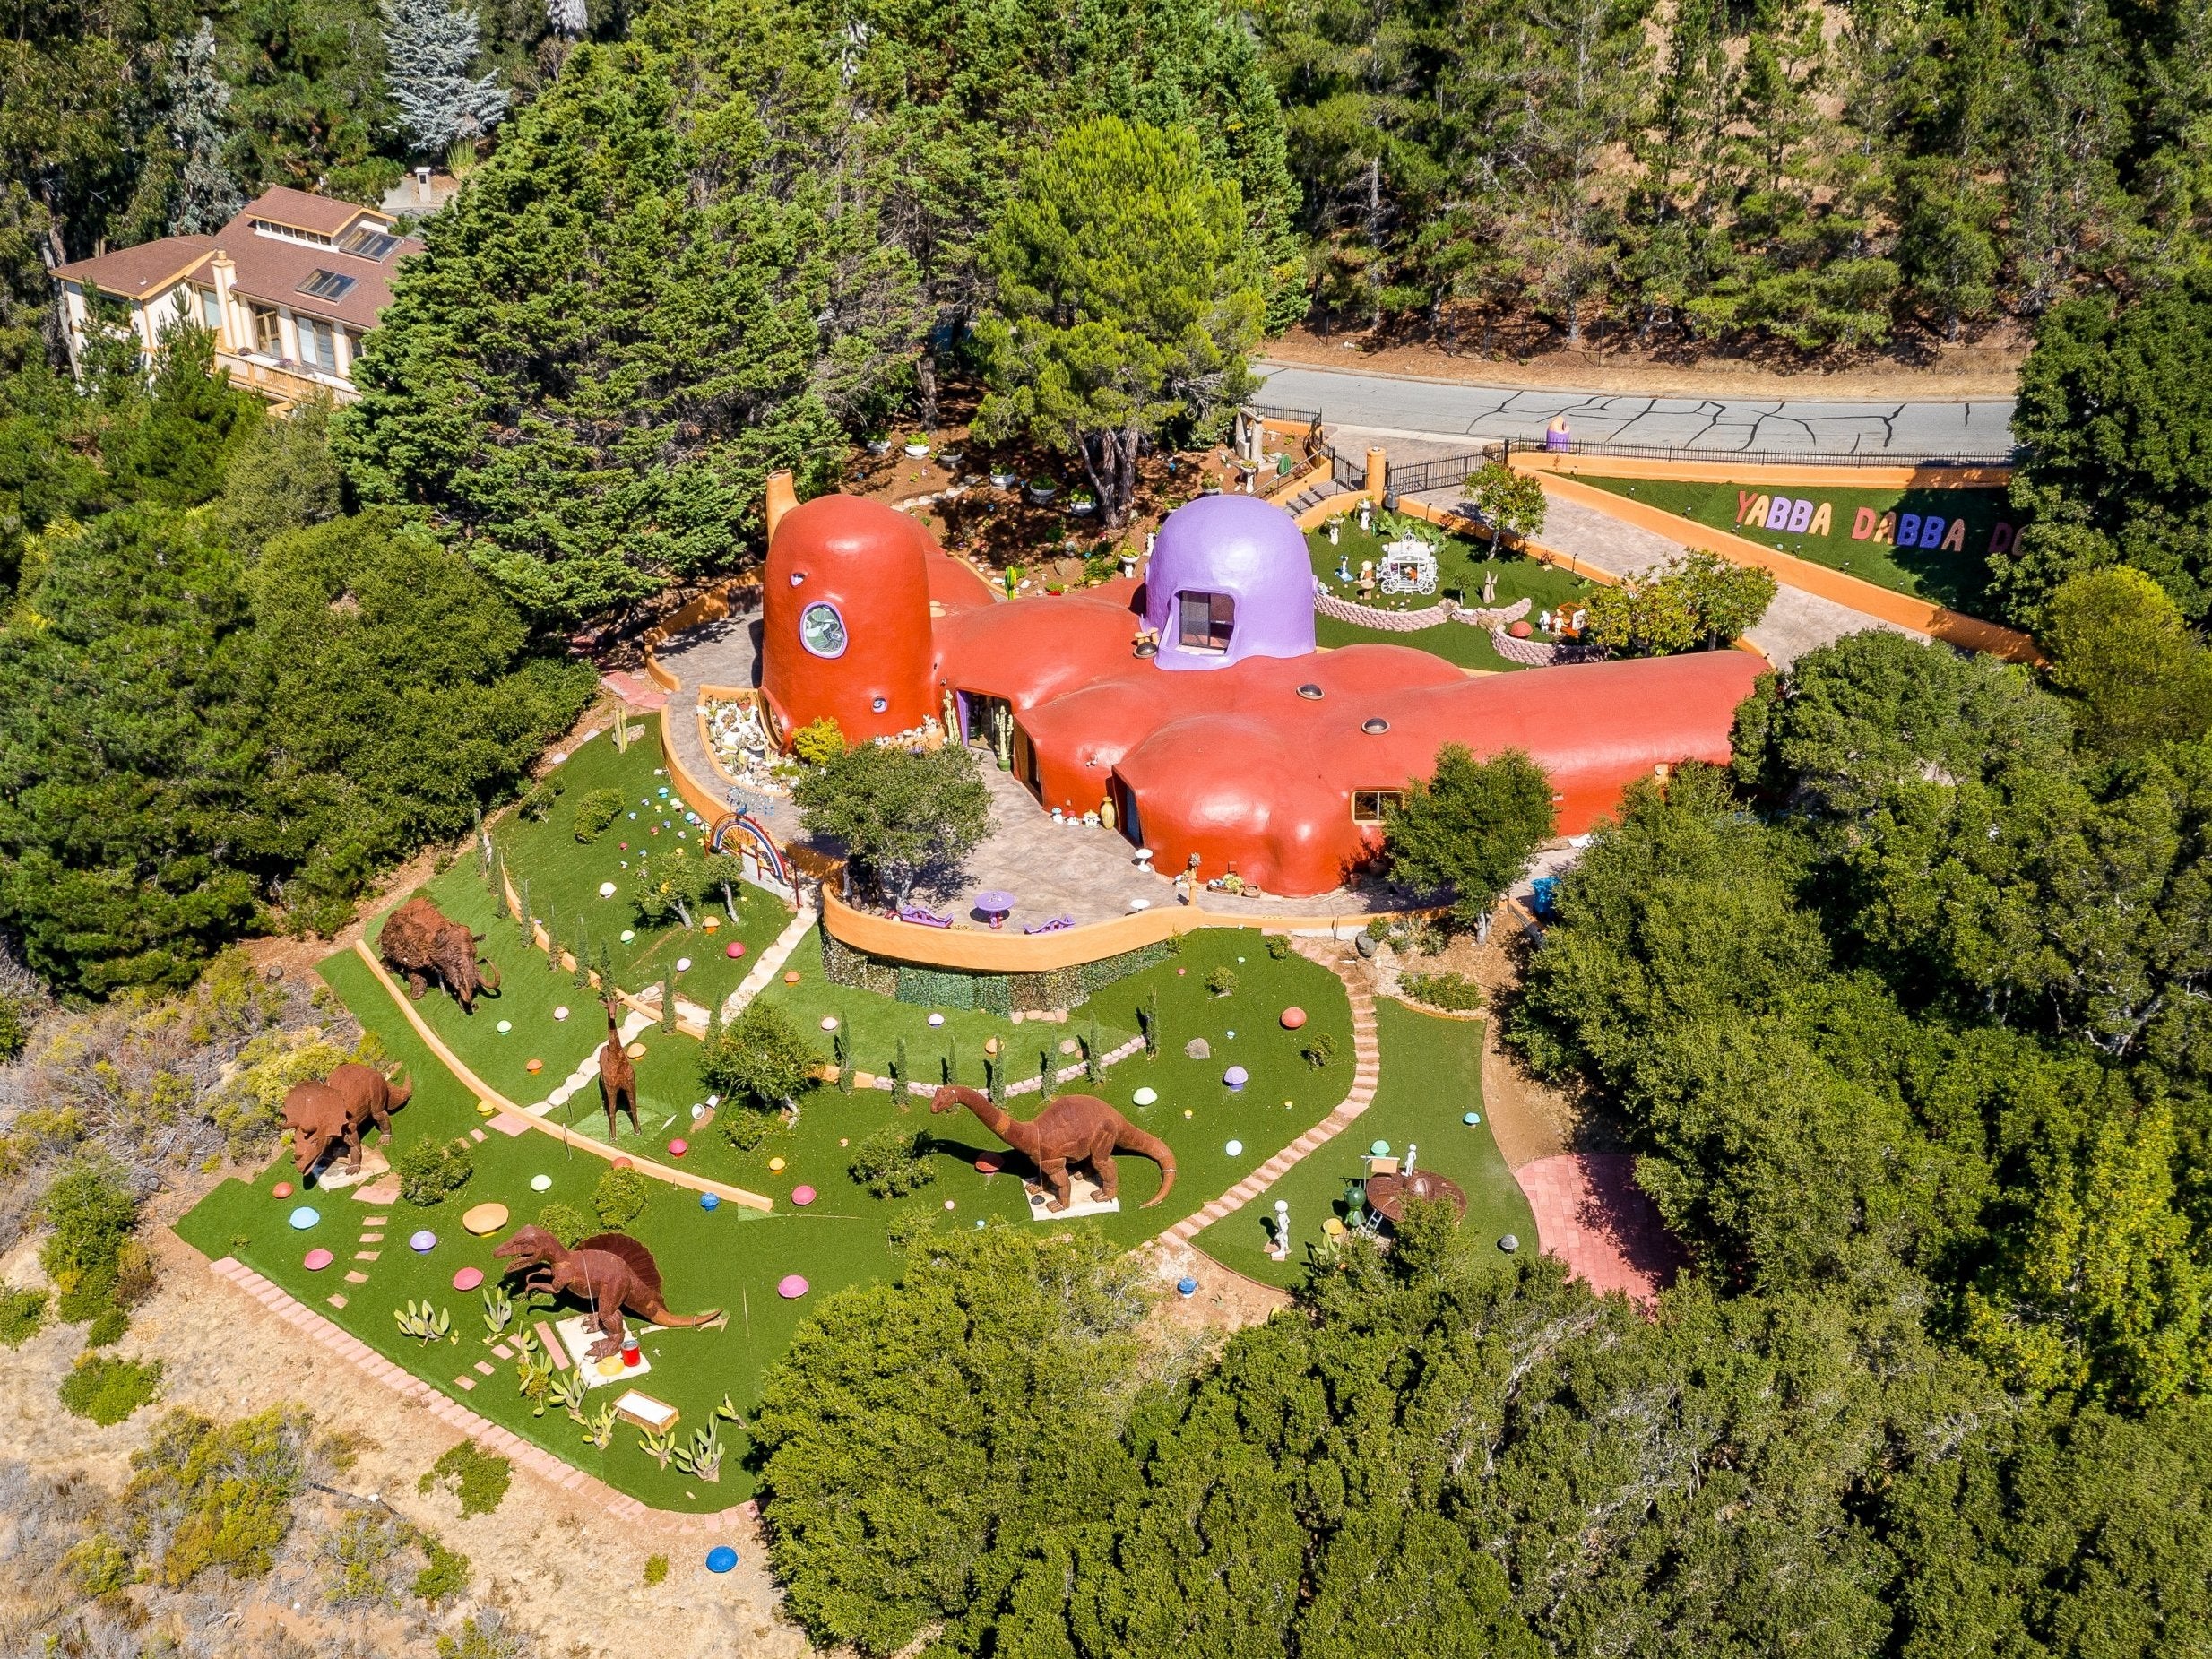 The famous Flintstone House is coming under fire for some additions to the property.